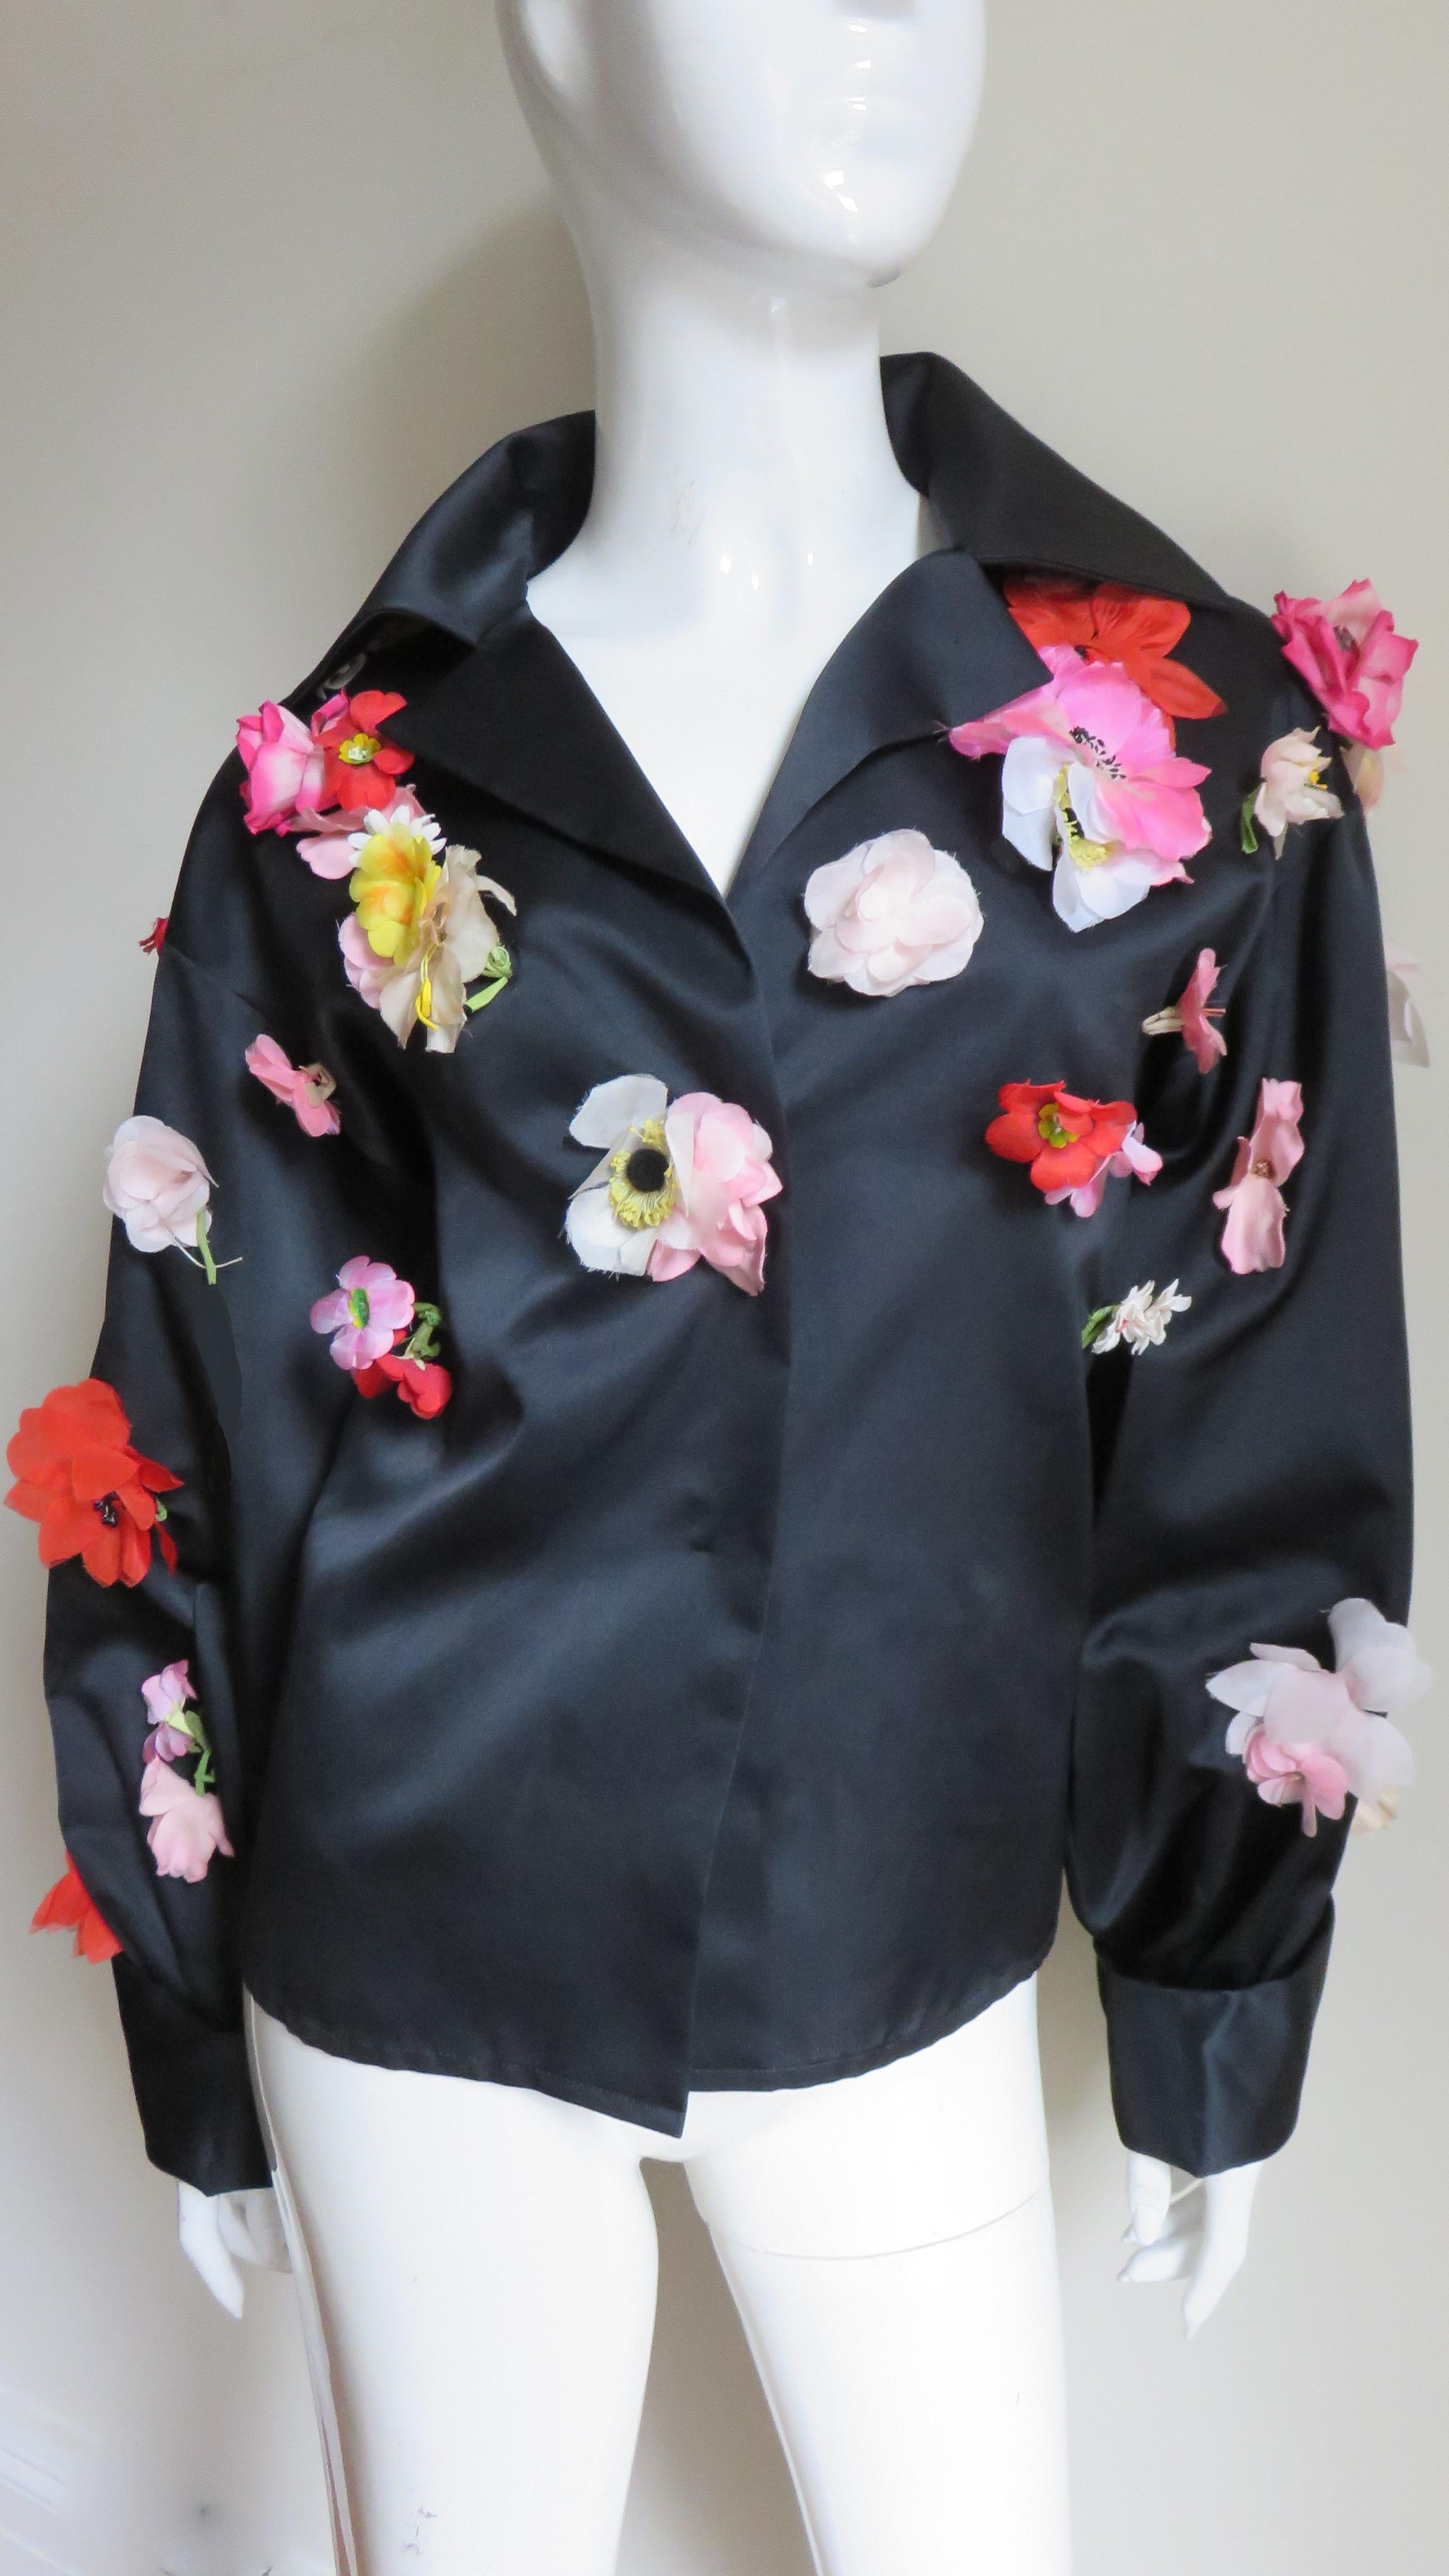 An incredible black silk shirt, blouse, jacket from Bill Blass  It has a lapel collar and full sleeves with fold back cuffs.  The jacket is covered in hand made silk flower appliques of varying types, sizes and colors. Stunning!  It has black silk